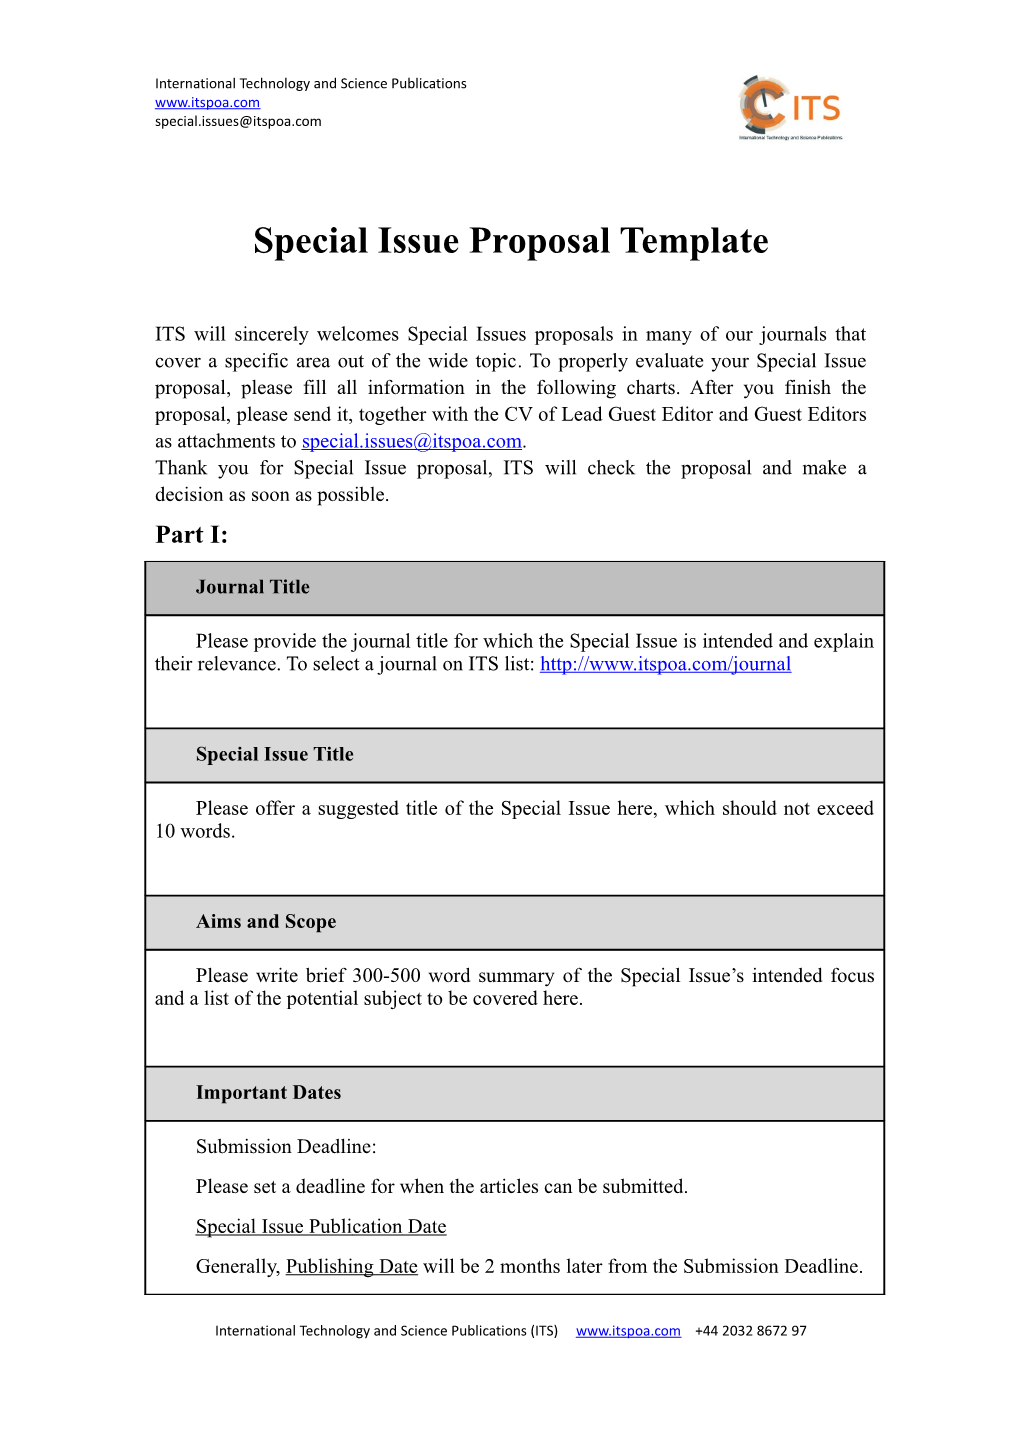 Special Issue Proposal Template